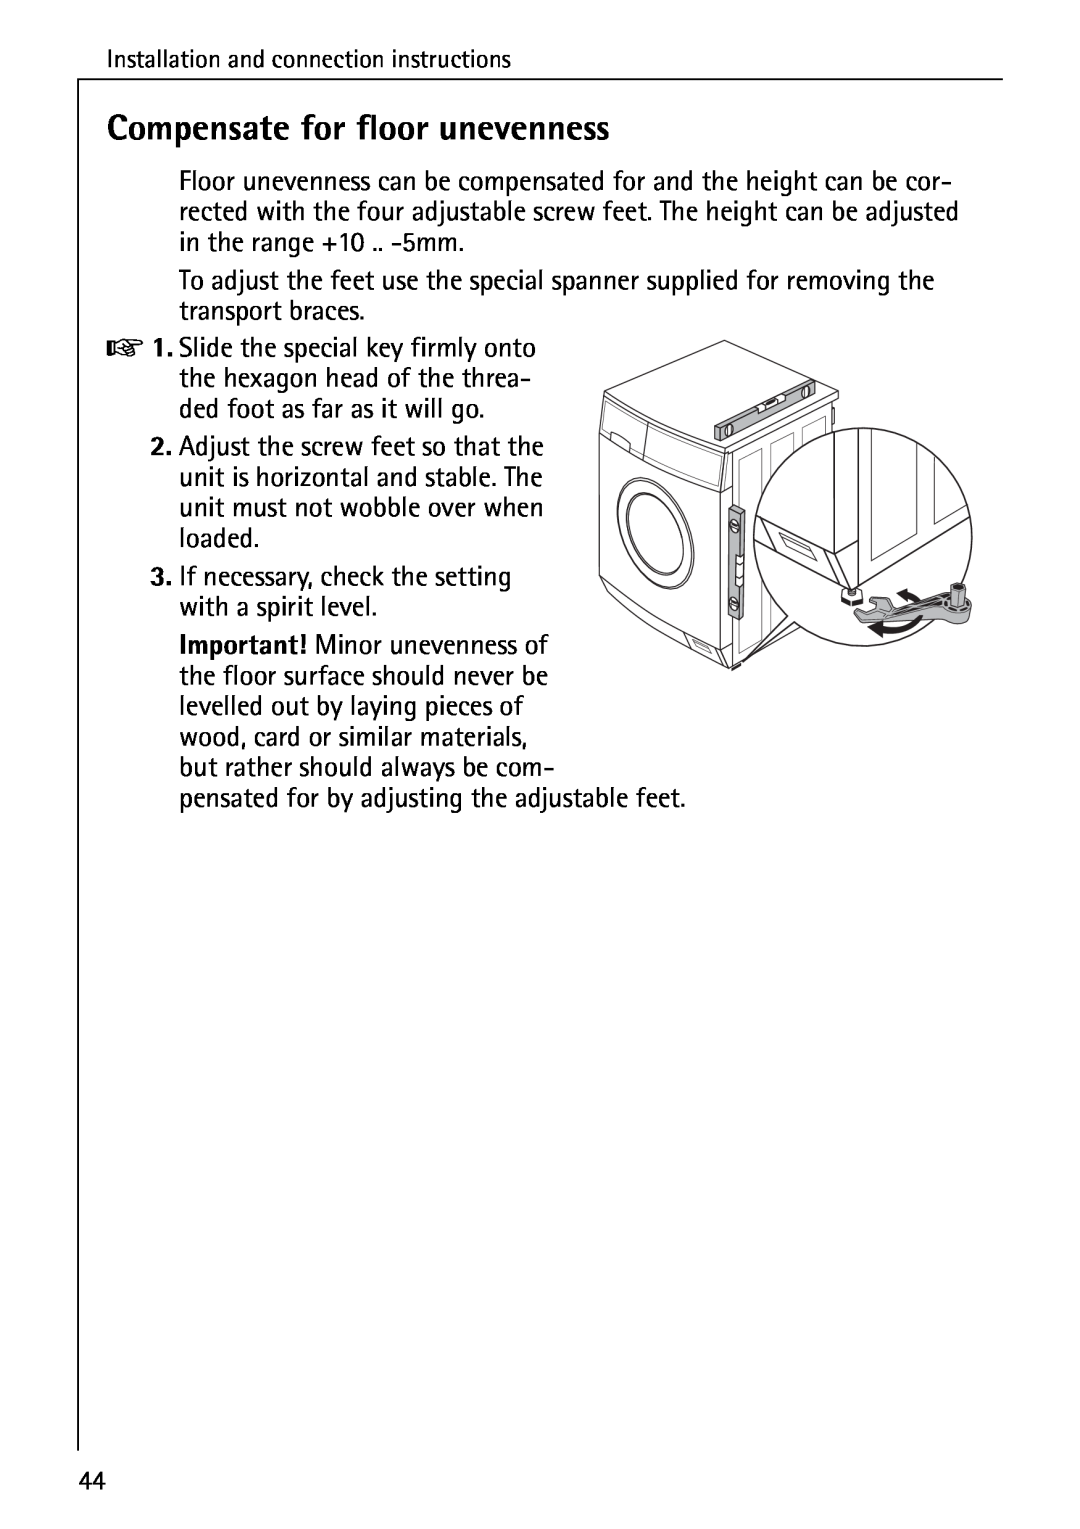 AEG 72640 manual Compensate for floor unevenness 